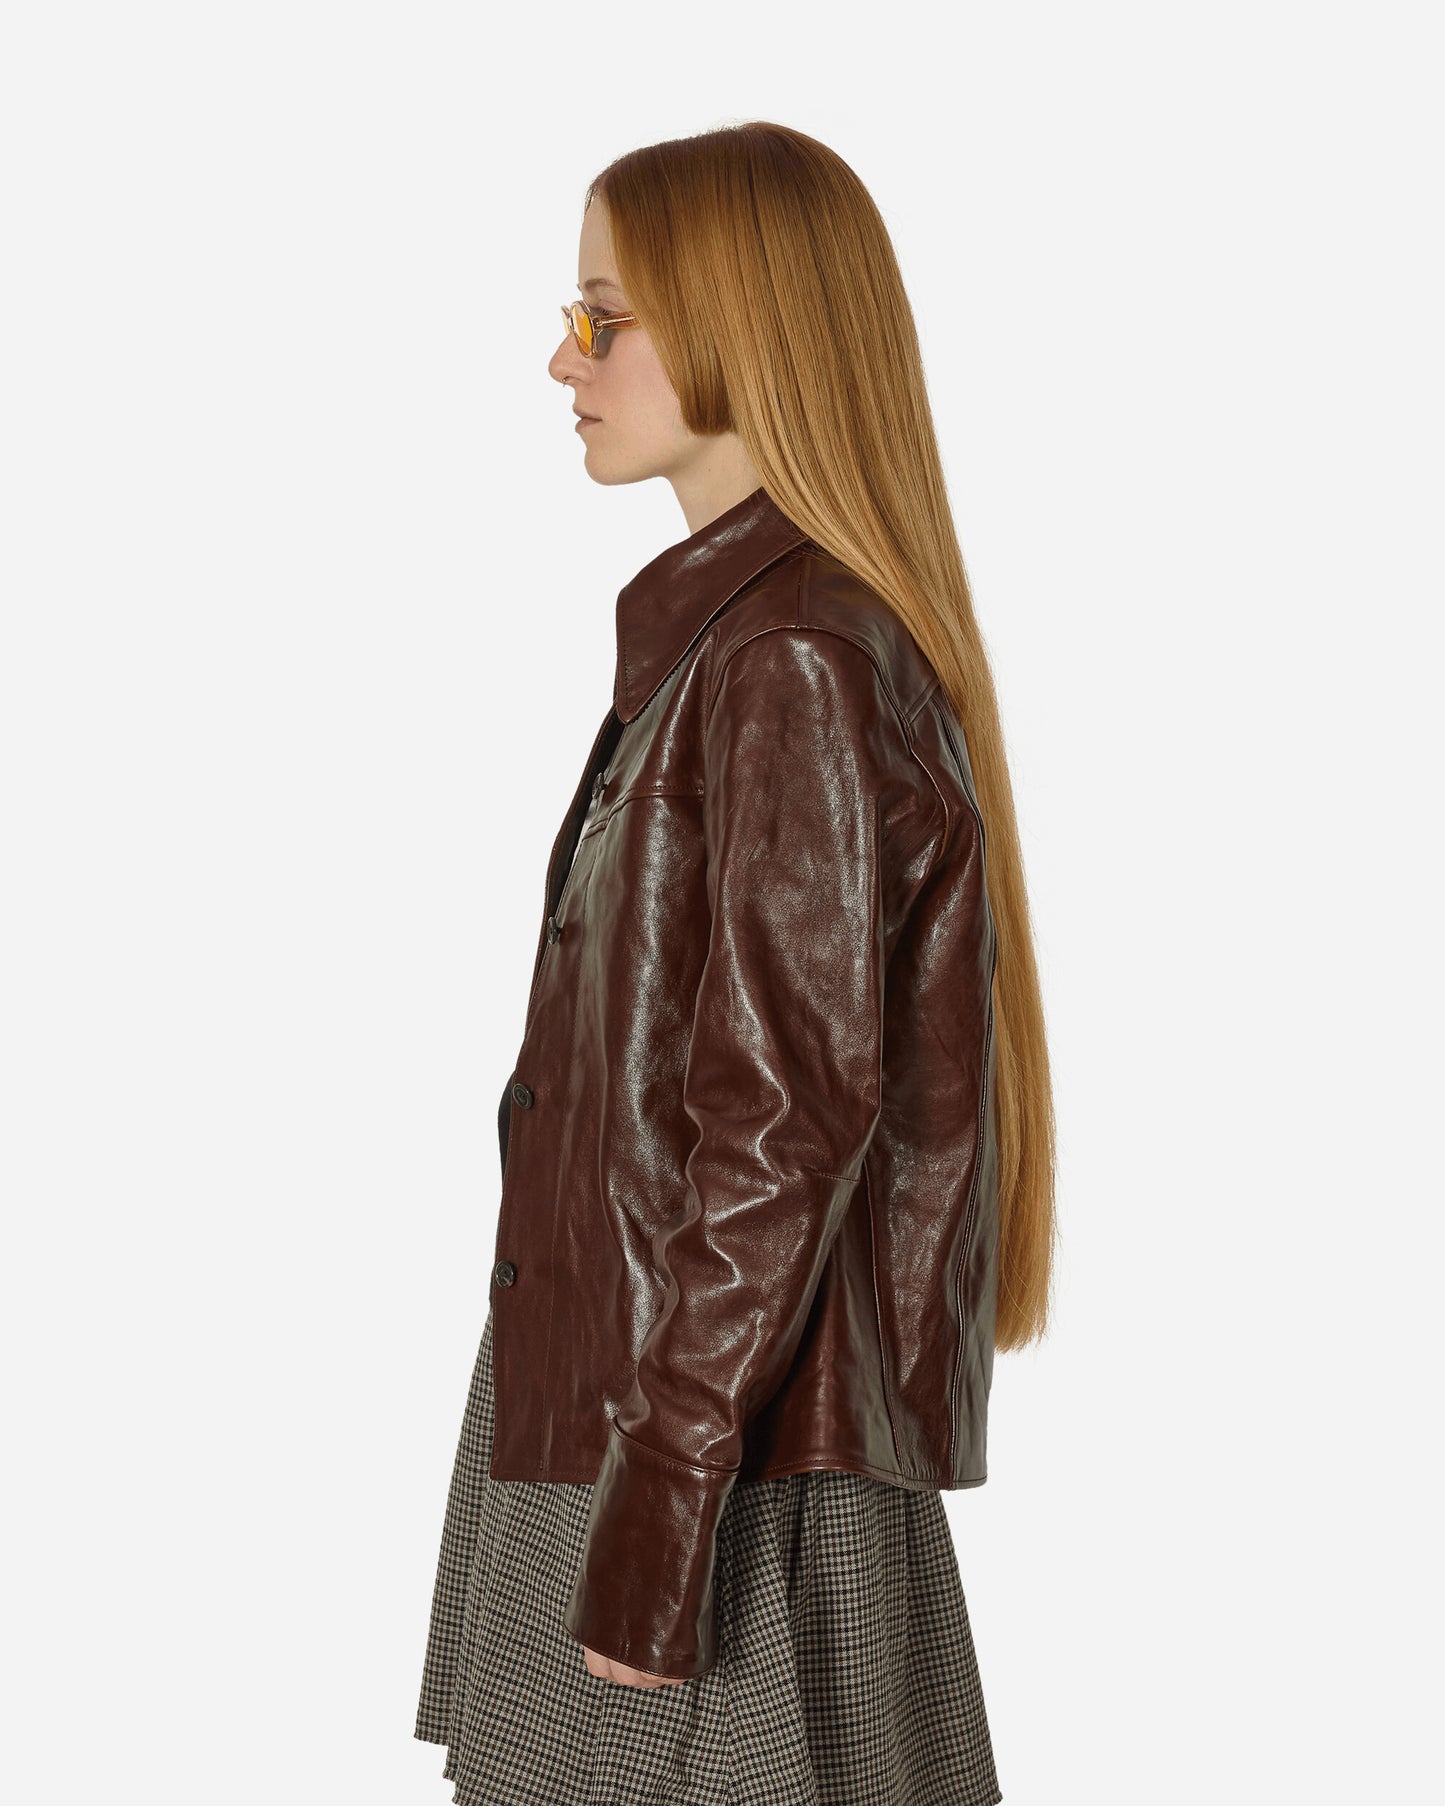 Our Legacy Wmns Verve Jacket True Dye Tuscan Brown Leather Coats and Jackets Jackets W2249VTD 001